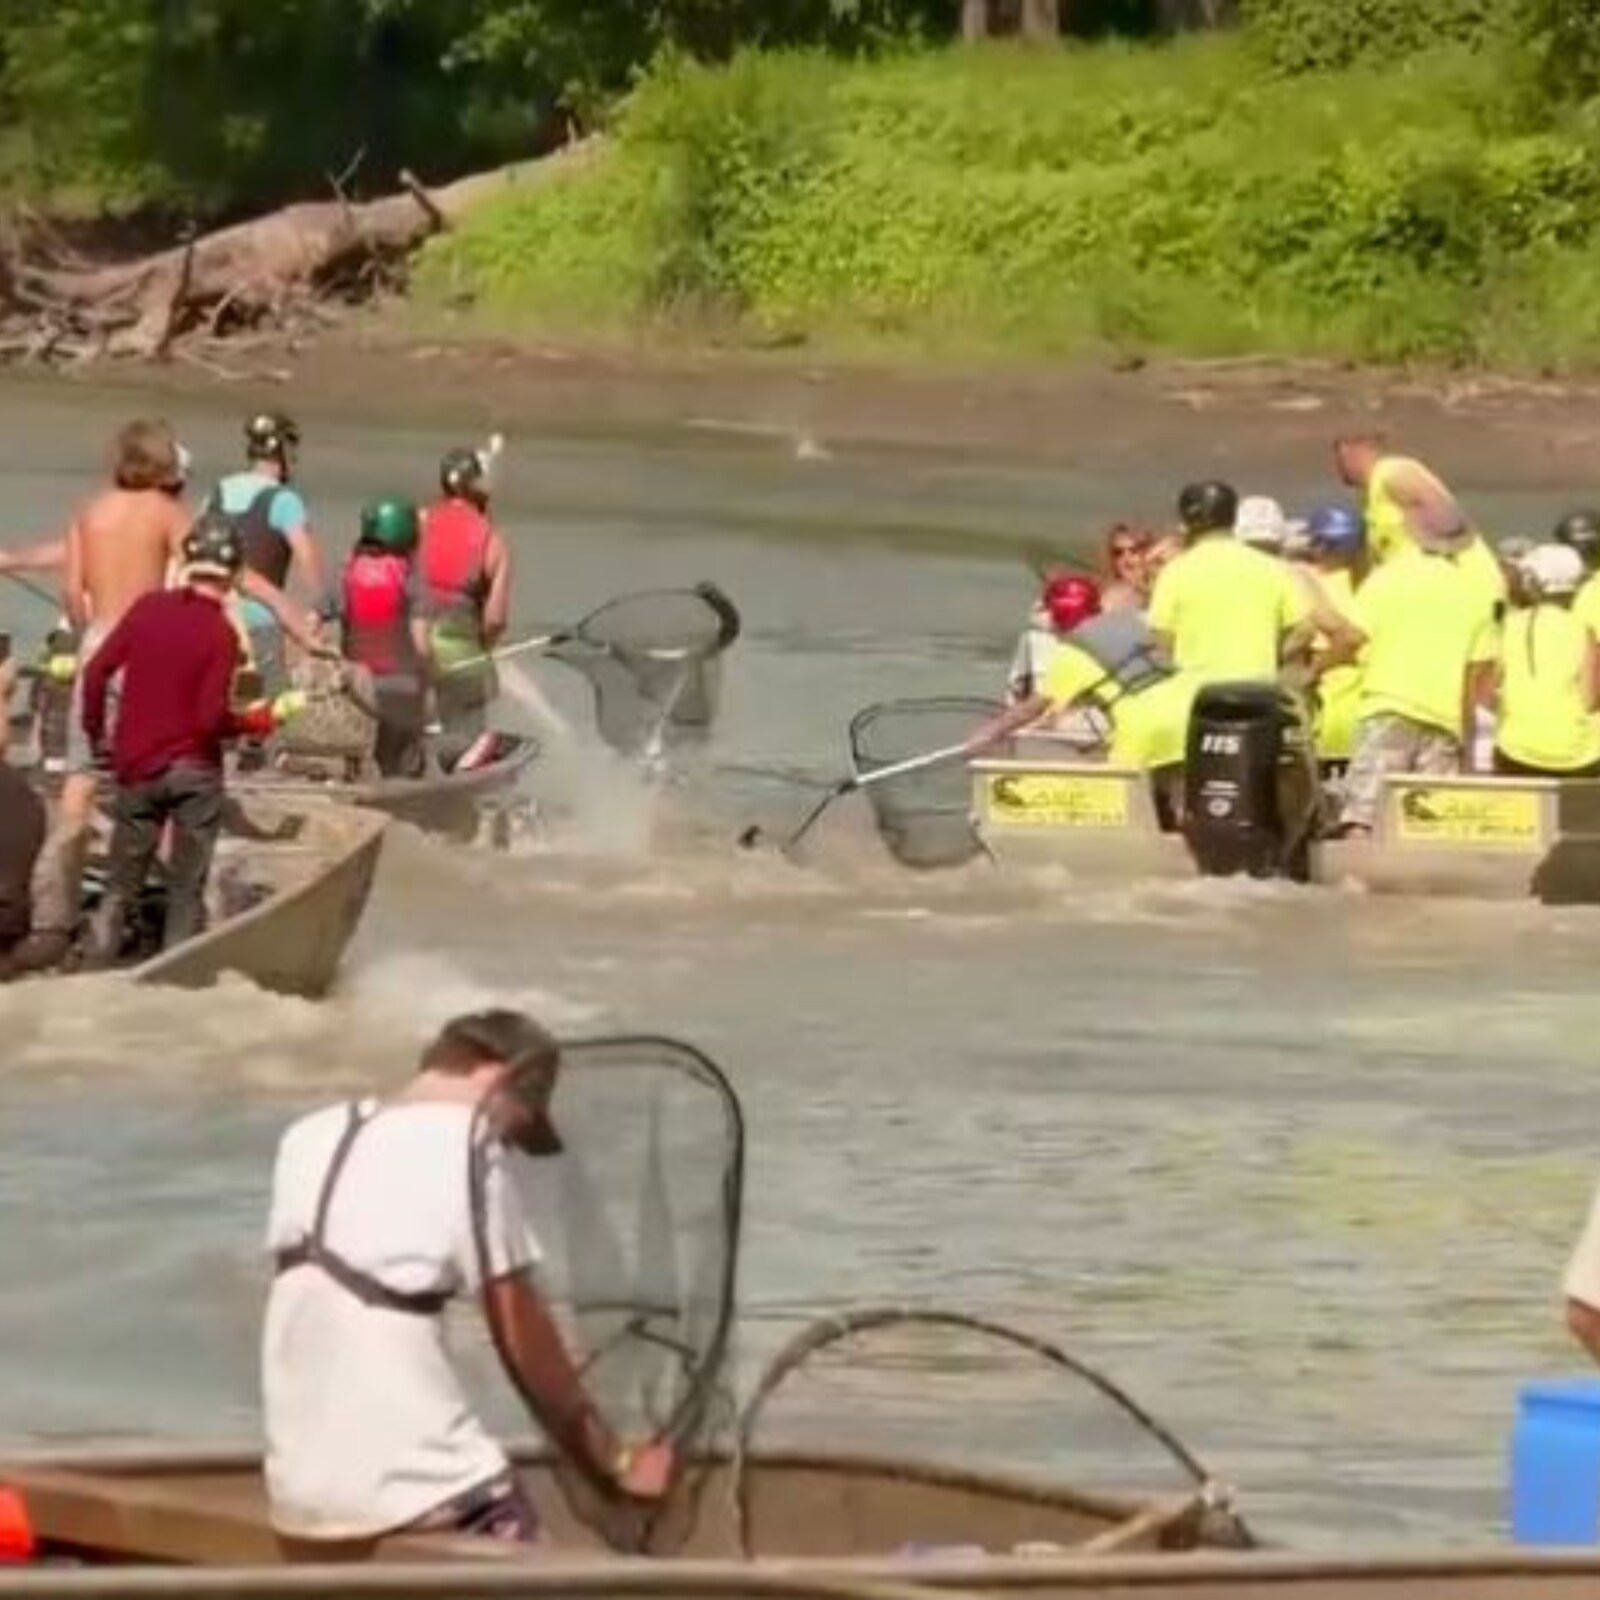 WATCH: Redneck Tournament Takes Off as Fish Jump Like 'Popcorn' From Illinois River